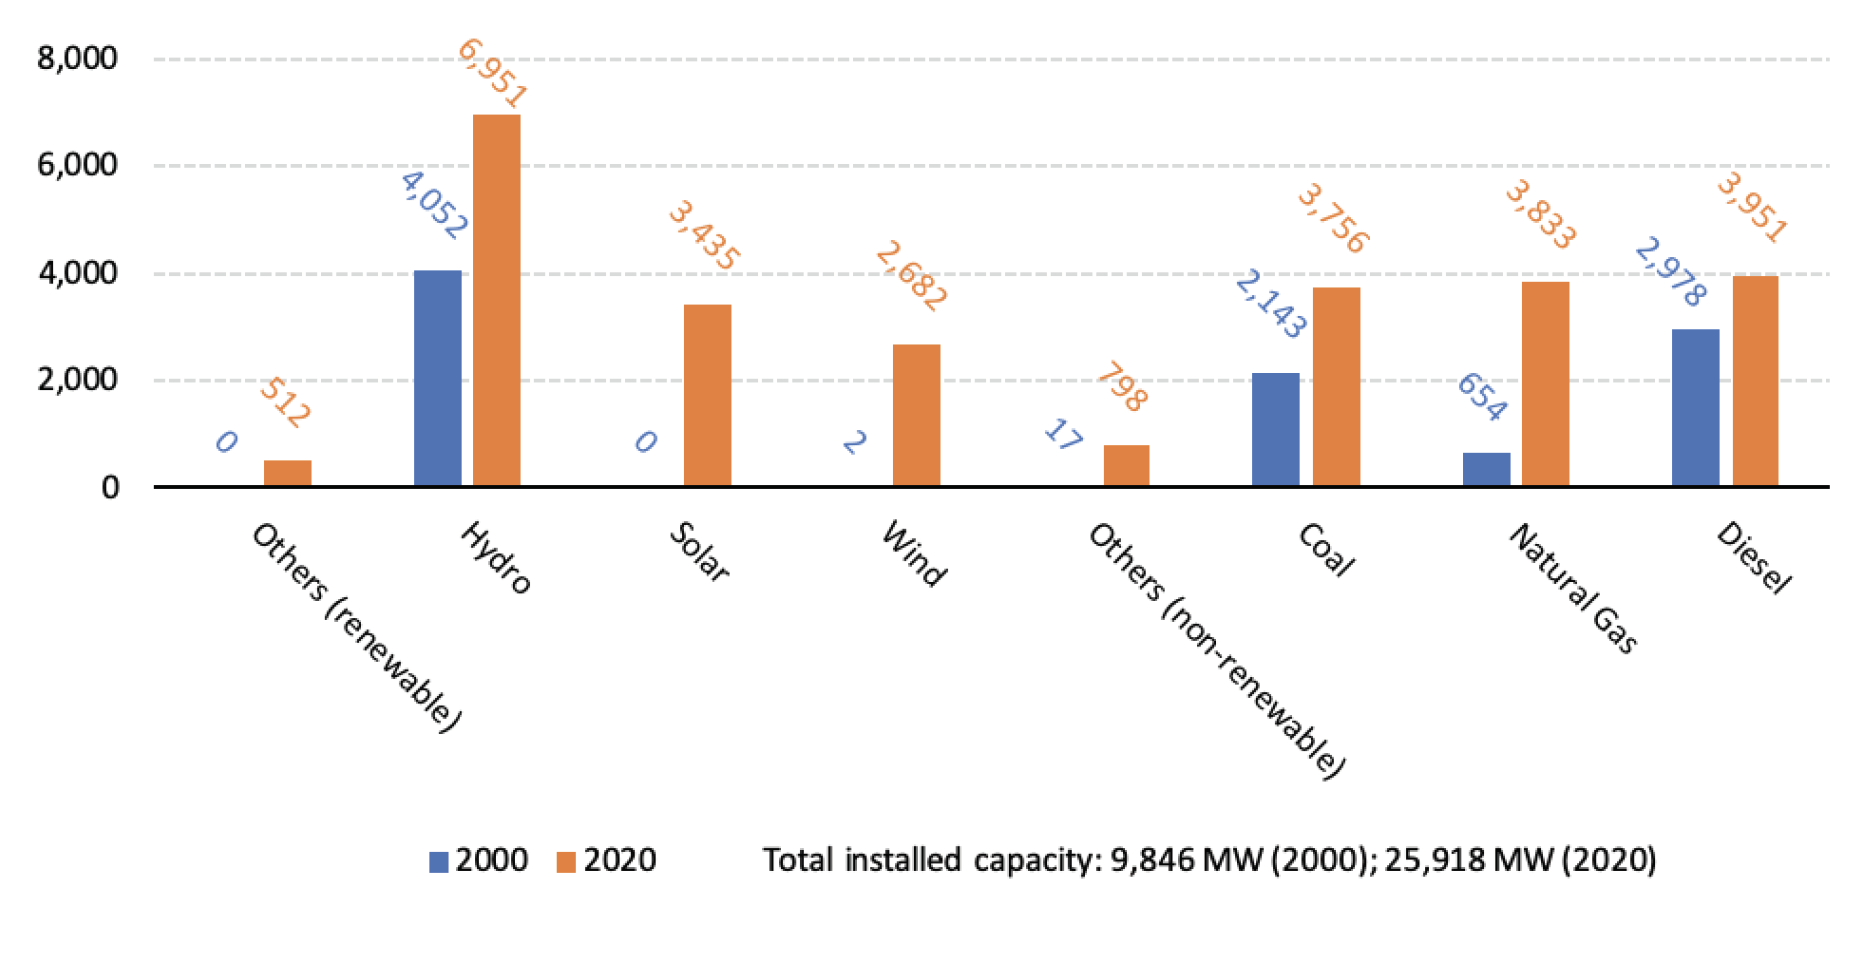 Chile's Overall Installed Capacity by Source, 2000 and 2020 (in MW)